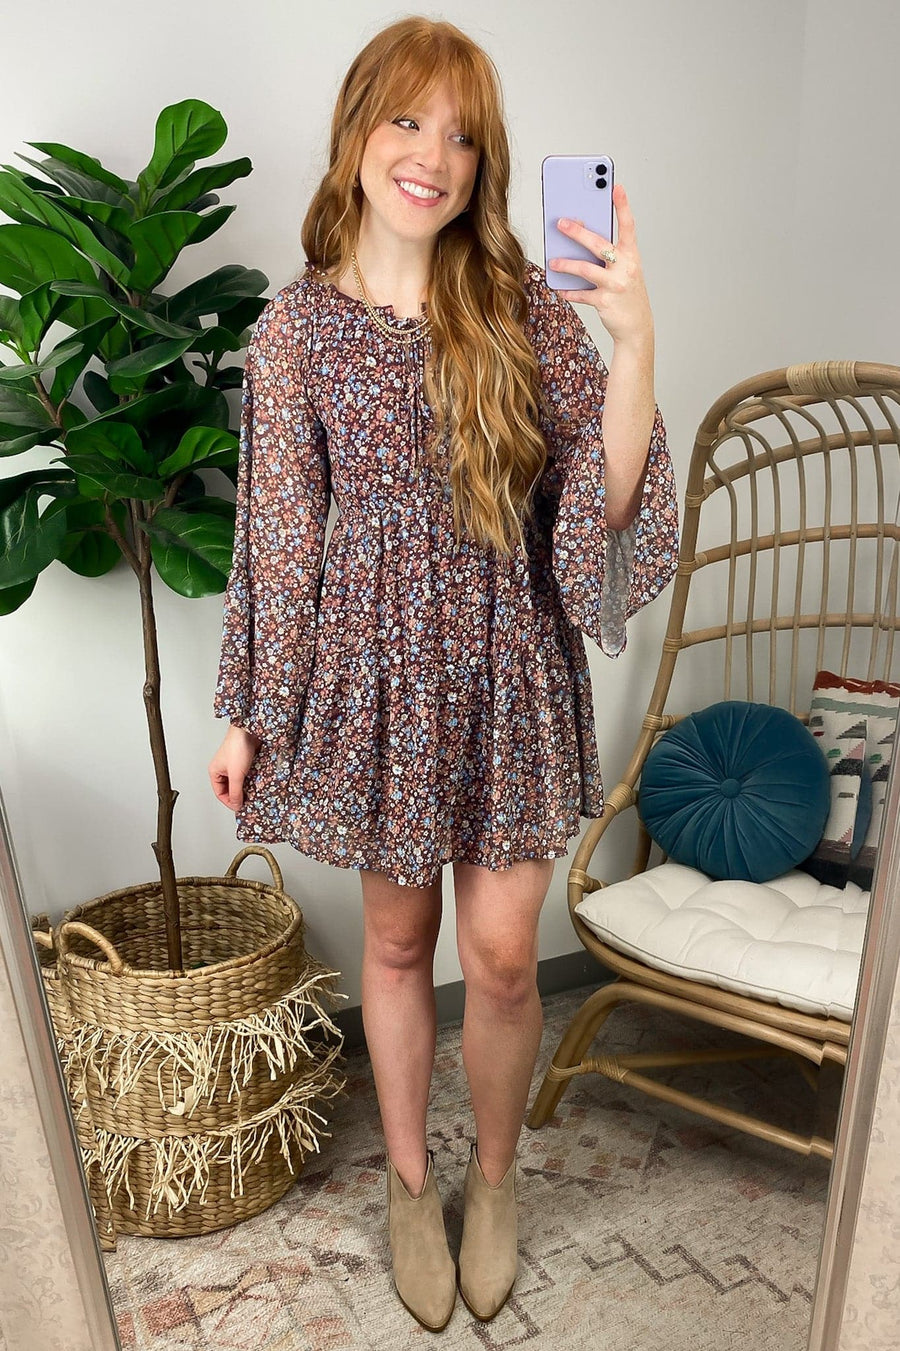  Instinctive Impression Floral Print Bell Sleeve Dress - FINAL SALE - Madison and Mallory